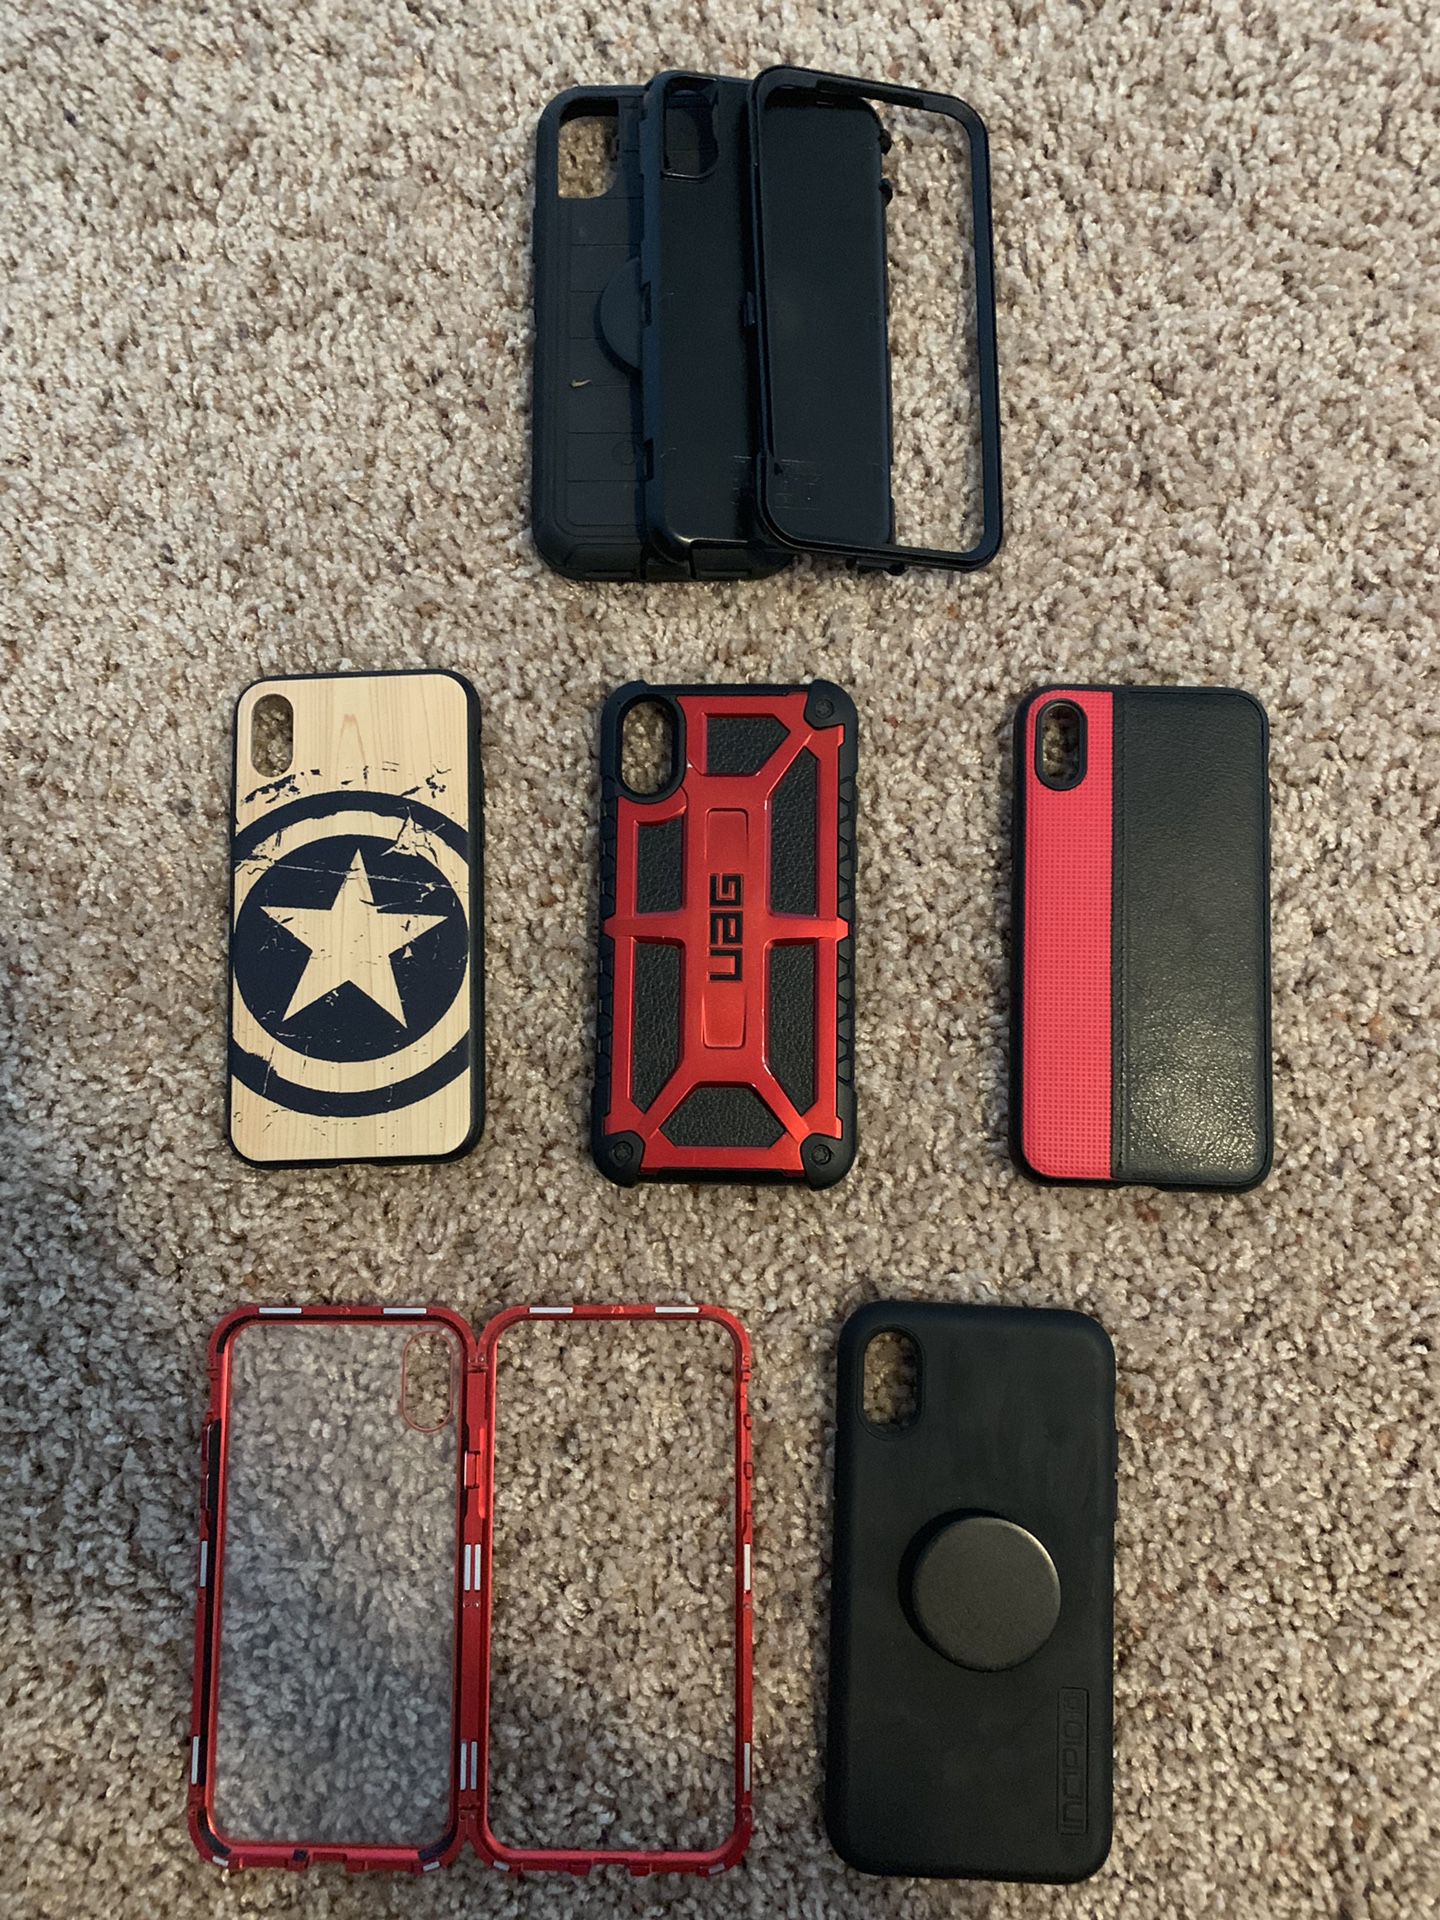 Cases for iPhone X/XS